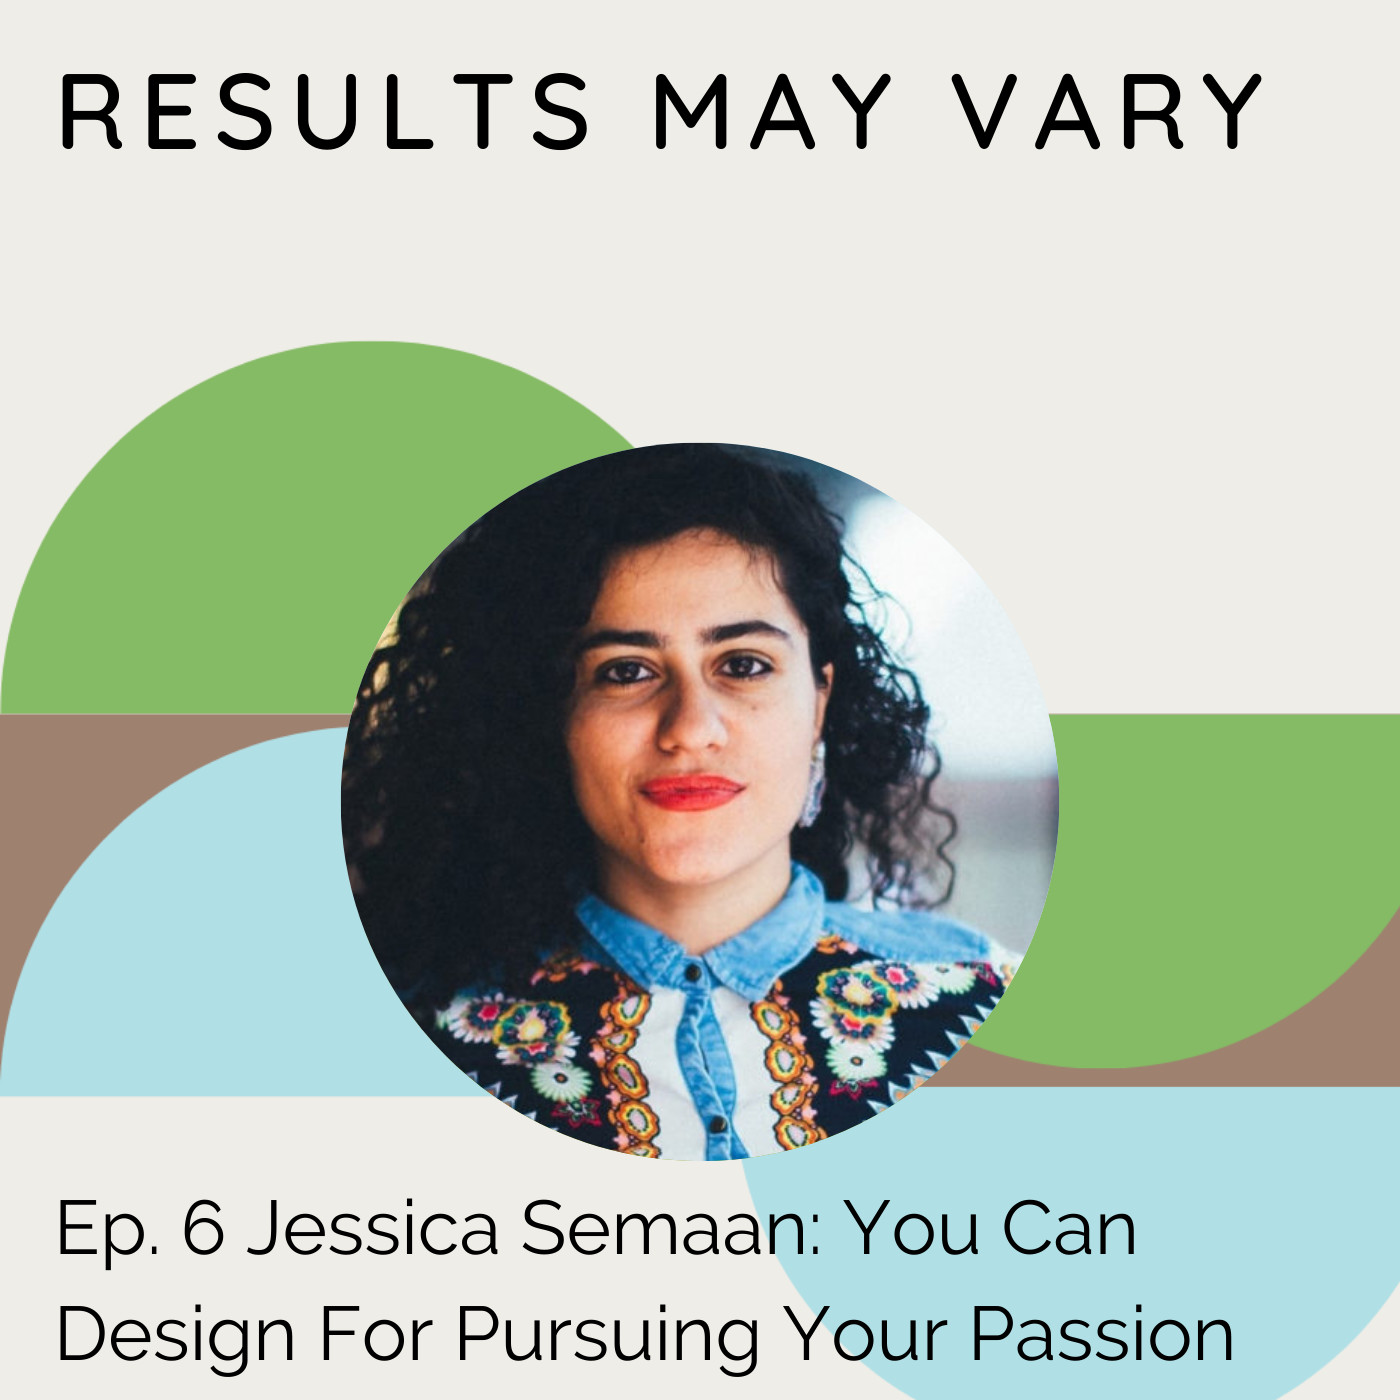 RMV 6: Jessica Semaan on Pursuing Your Passion